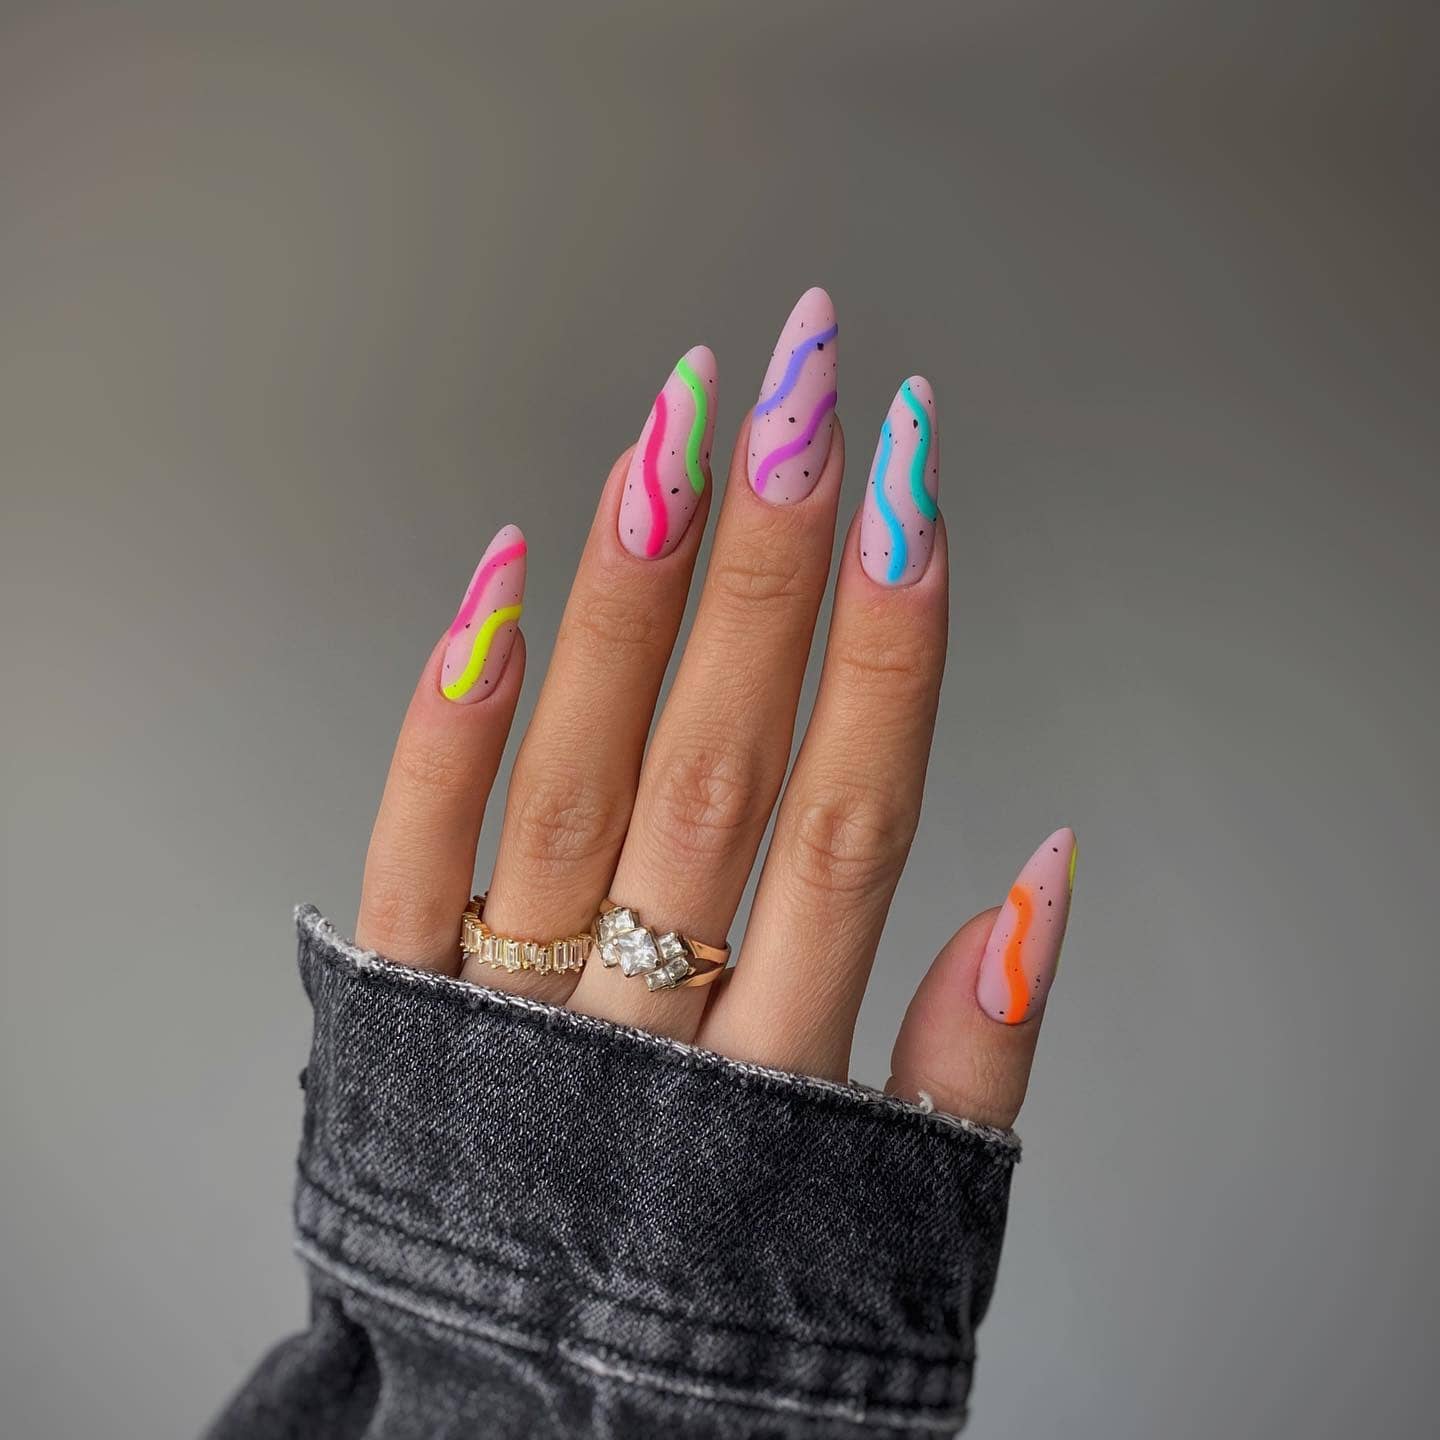 Over 100 Bright Summer Nail Art Designs That Will Be So Trendy images 86